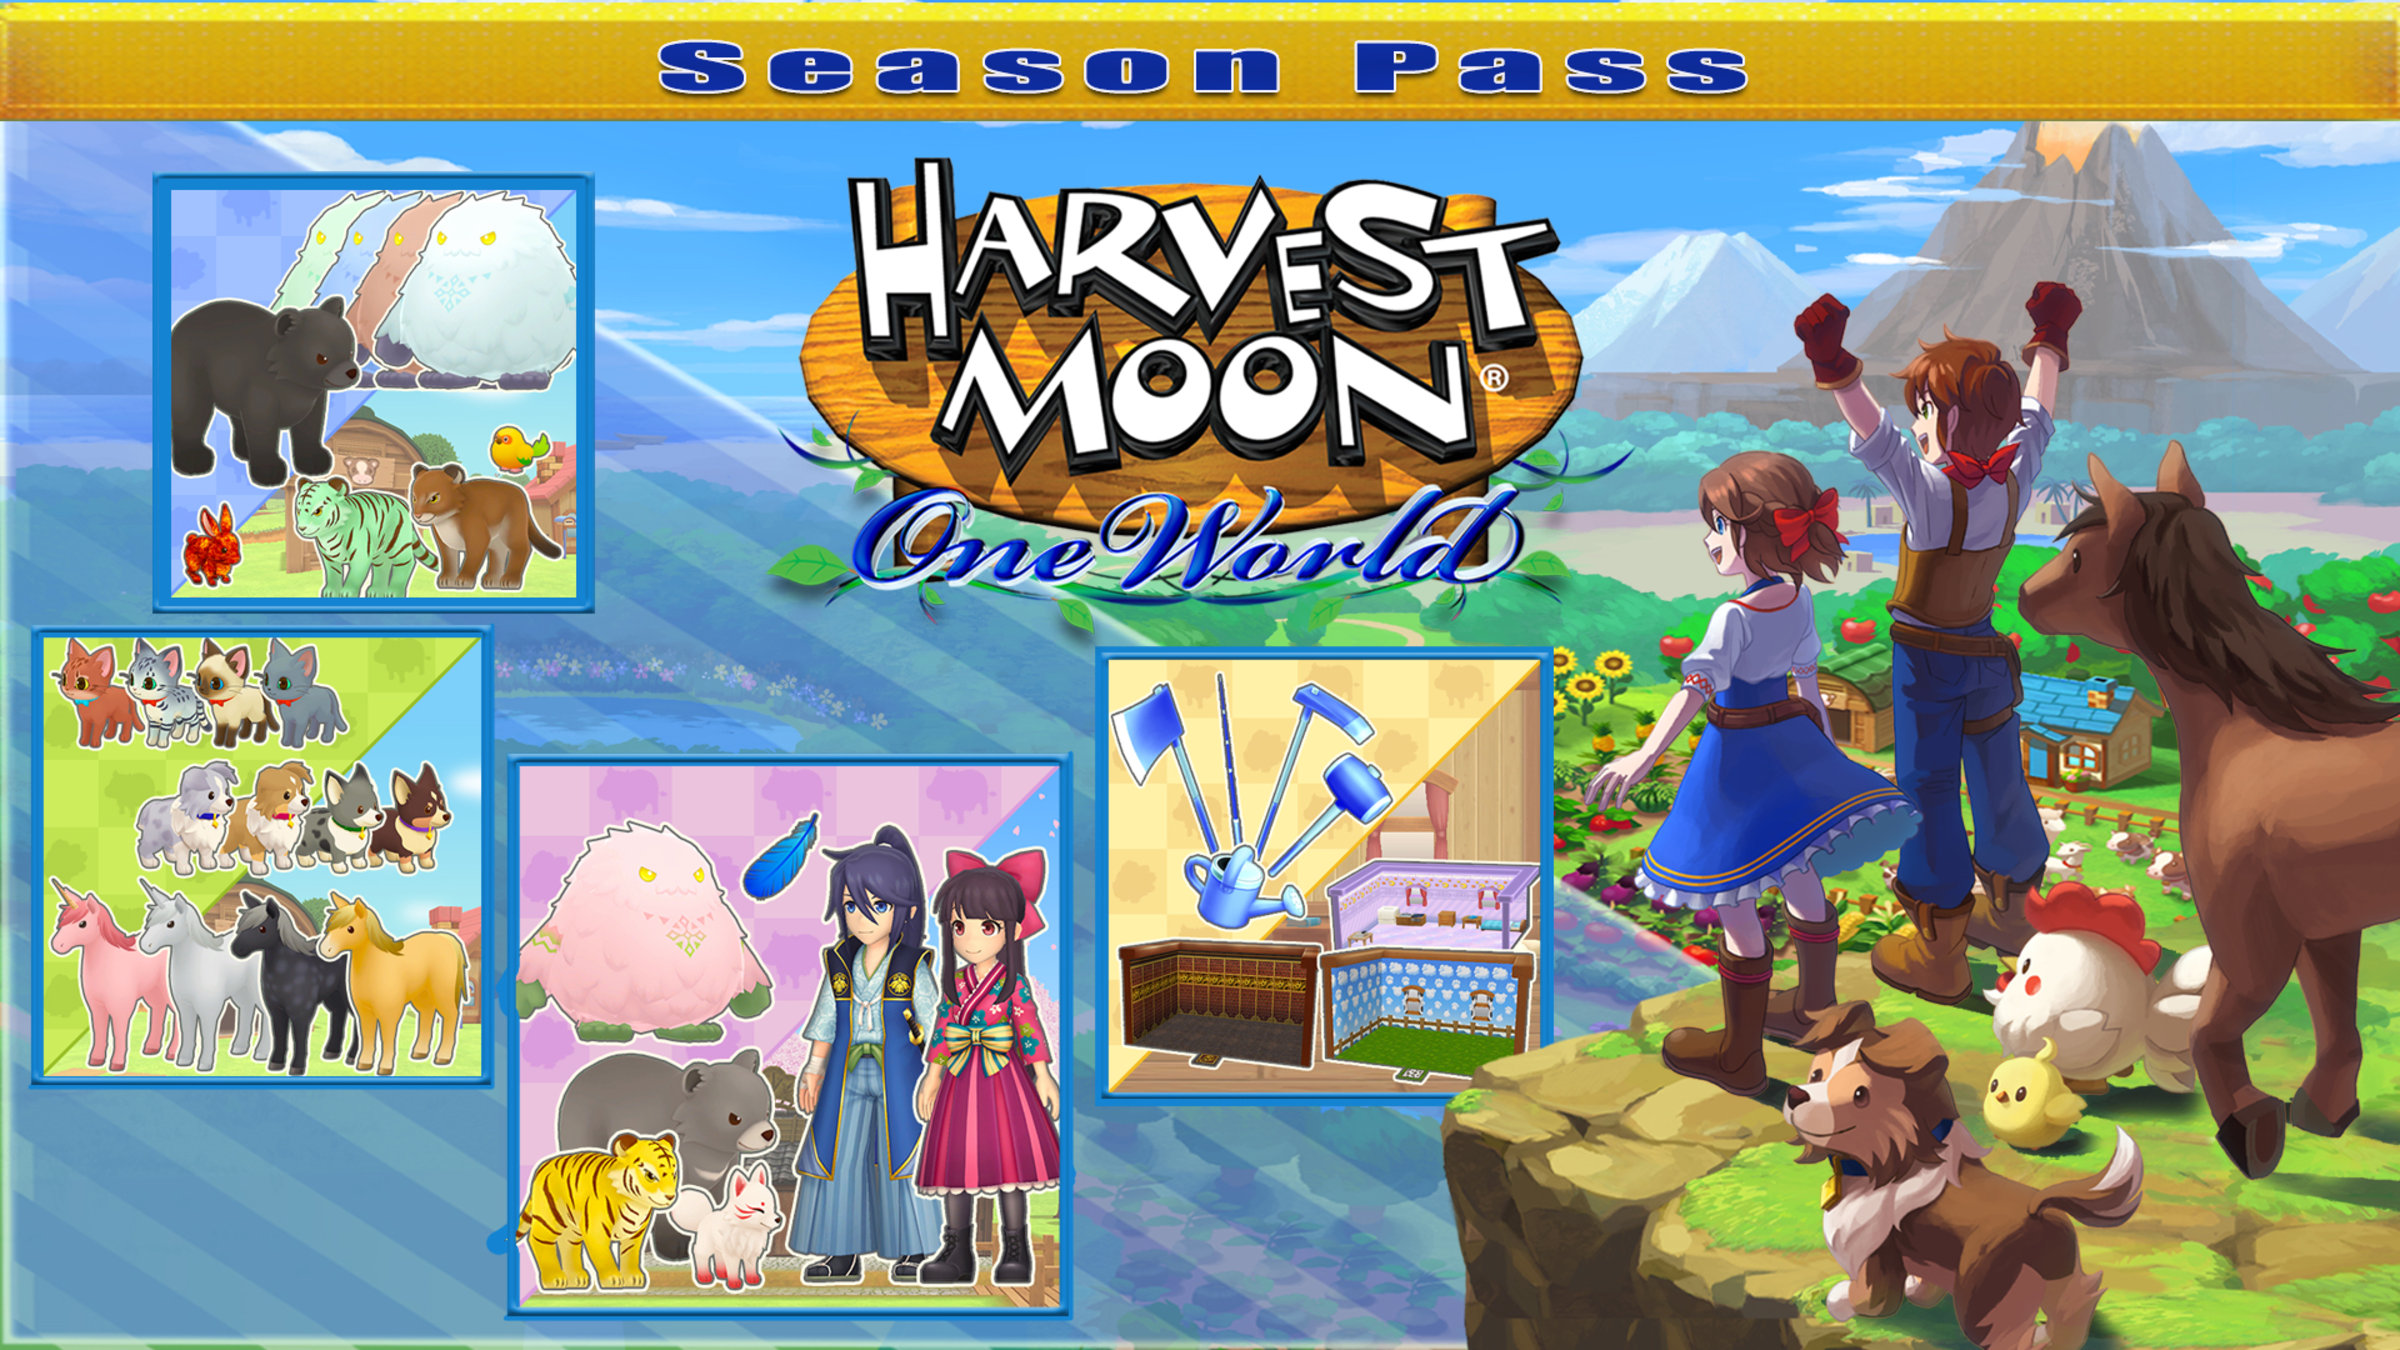 Harvest Moon®: One Site Nintendo World Official - Switch Pass Season Nintendo for